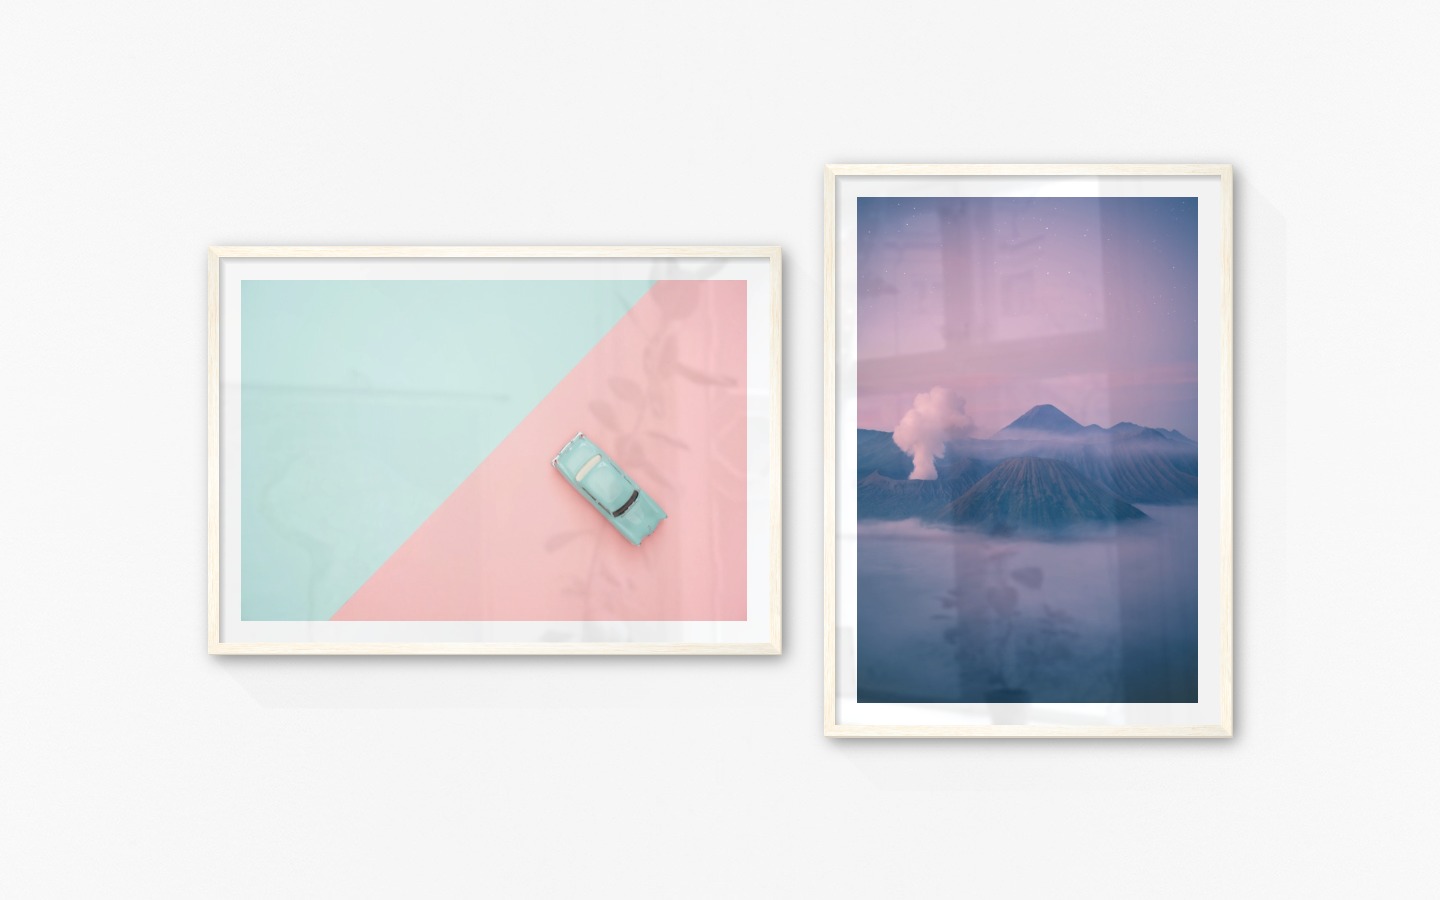 Gallery wall with picture frames in light wood in sizes 70x100 with prints "Blue car and pink" and "Mountains above the clouds"